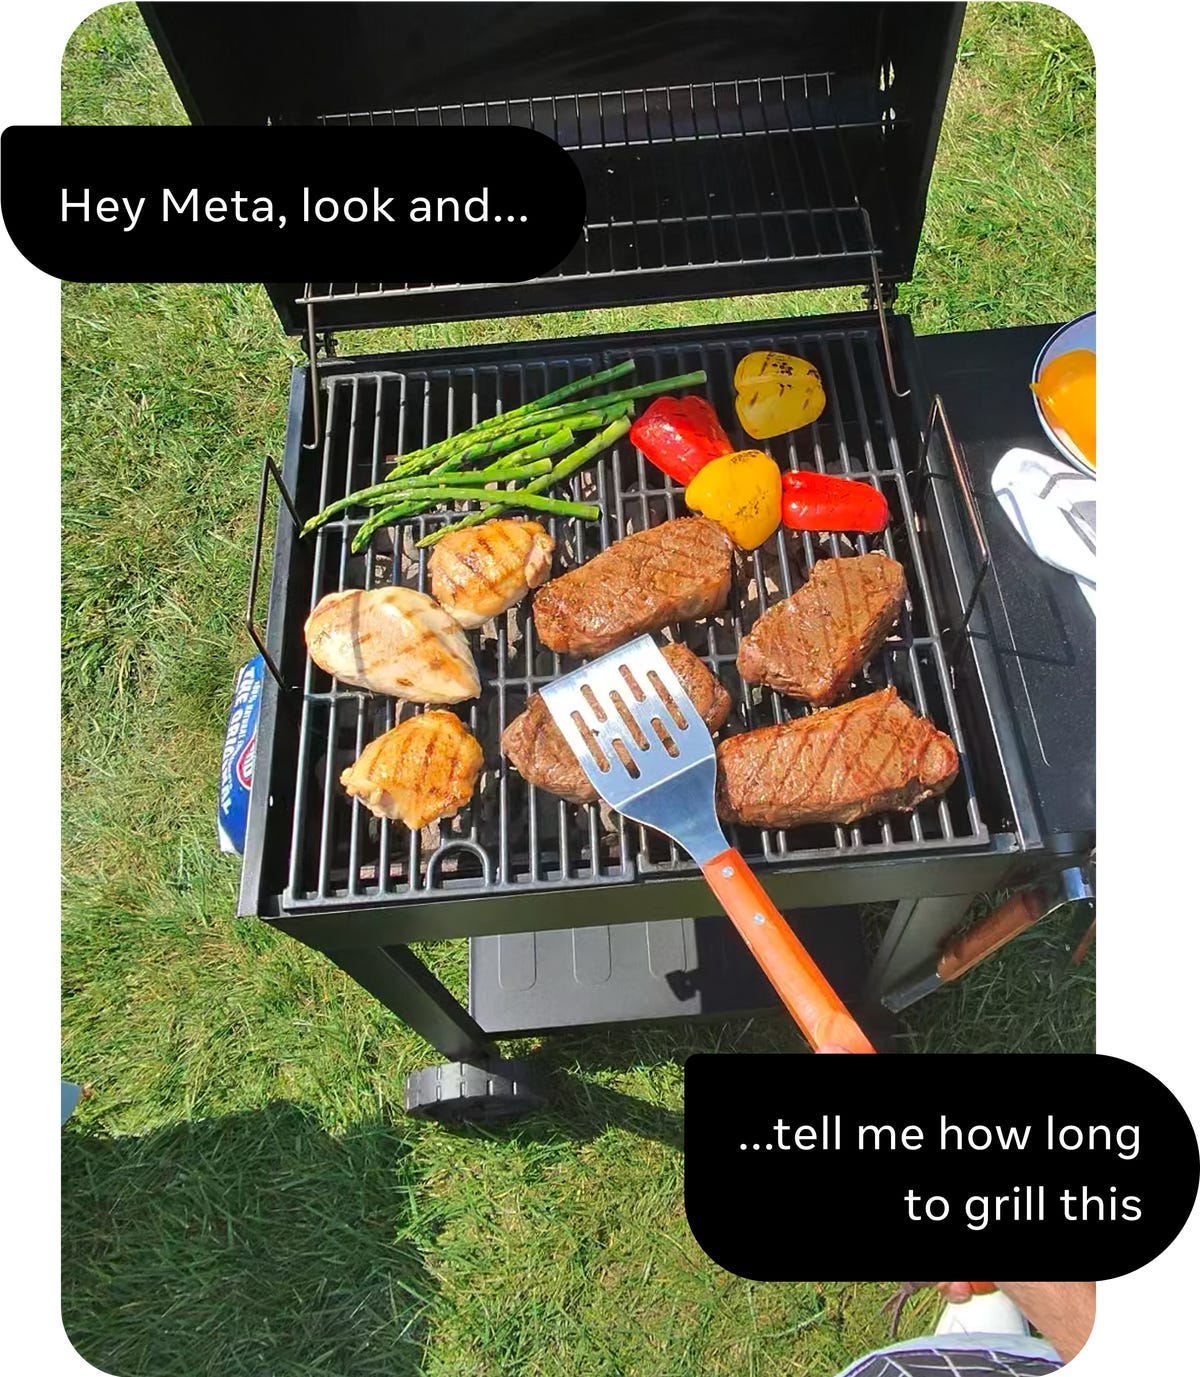 A photo of grilling, with captions asking an AI assistant for cooking help